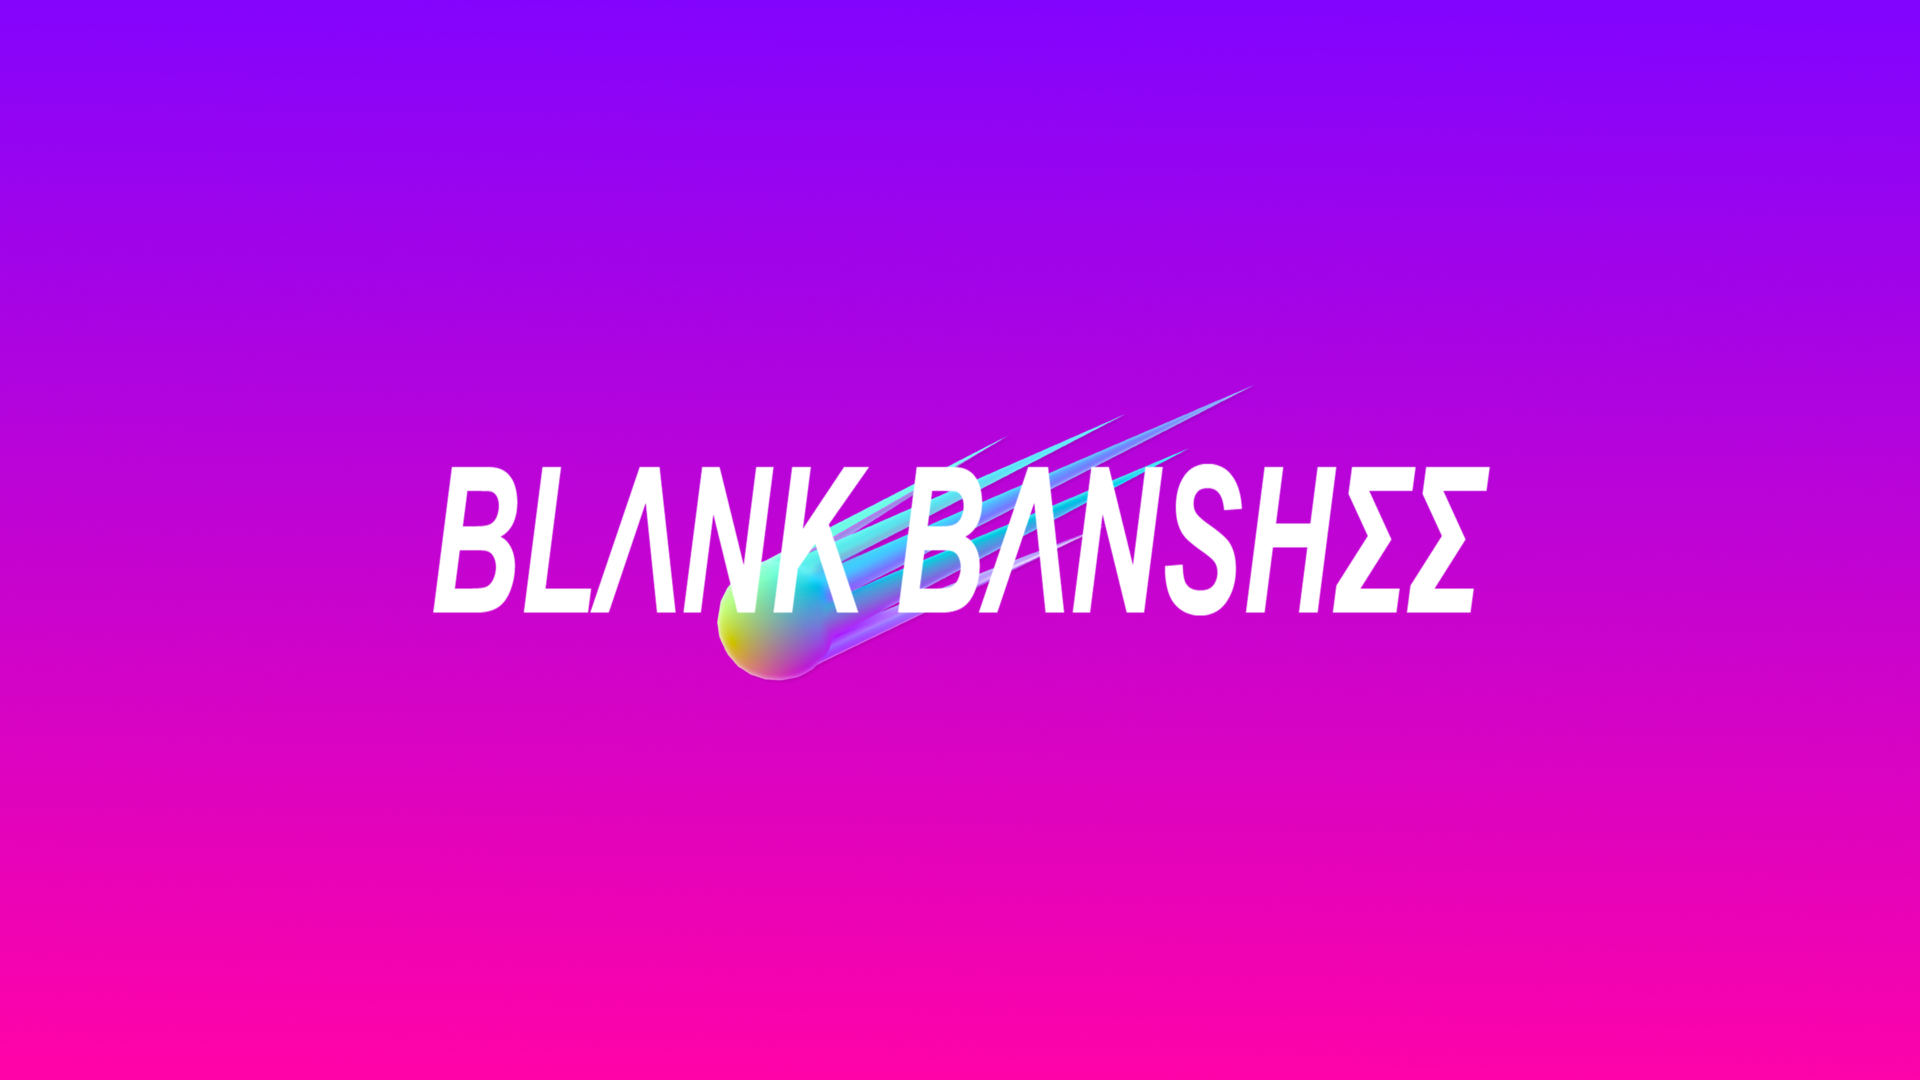 I Made A Quick Blank Banshee Wallpaper In Light Of - Blank Banshee , HD Wallpaper & Backgrounds